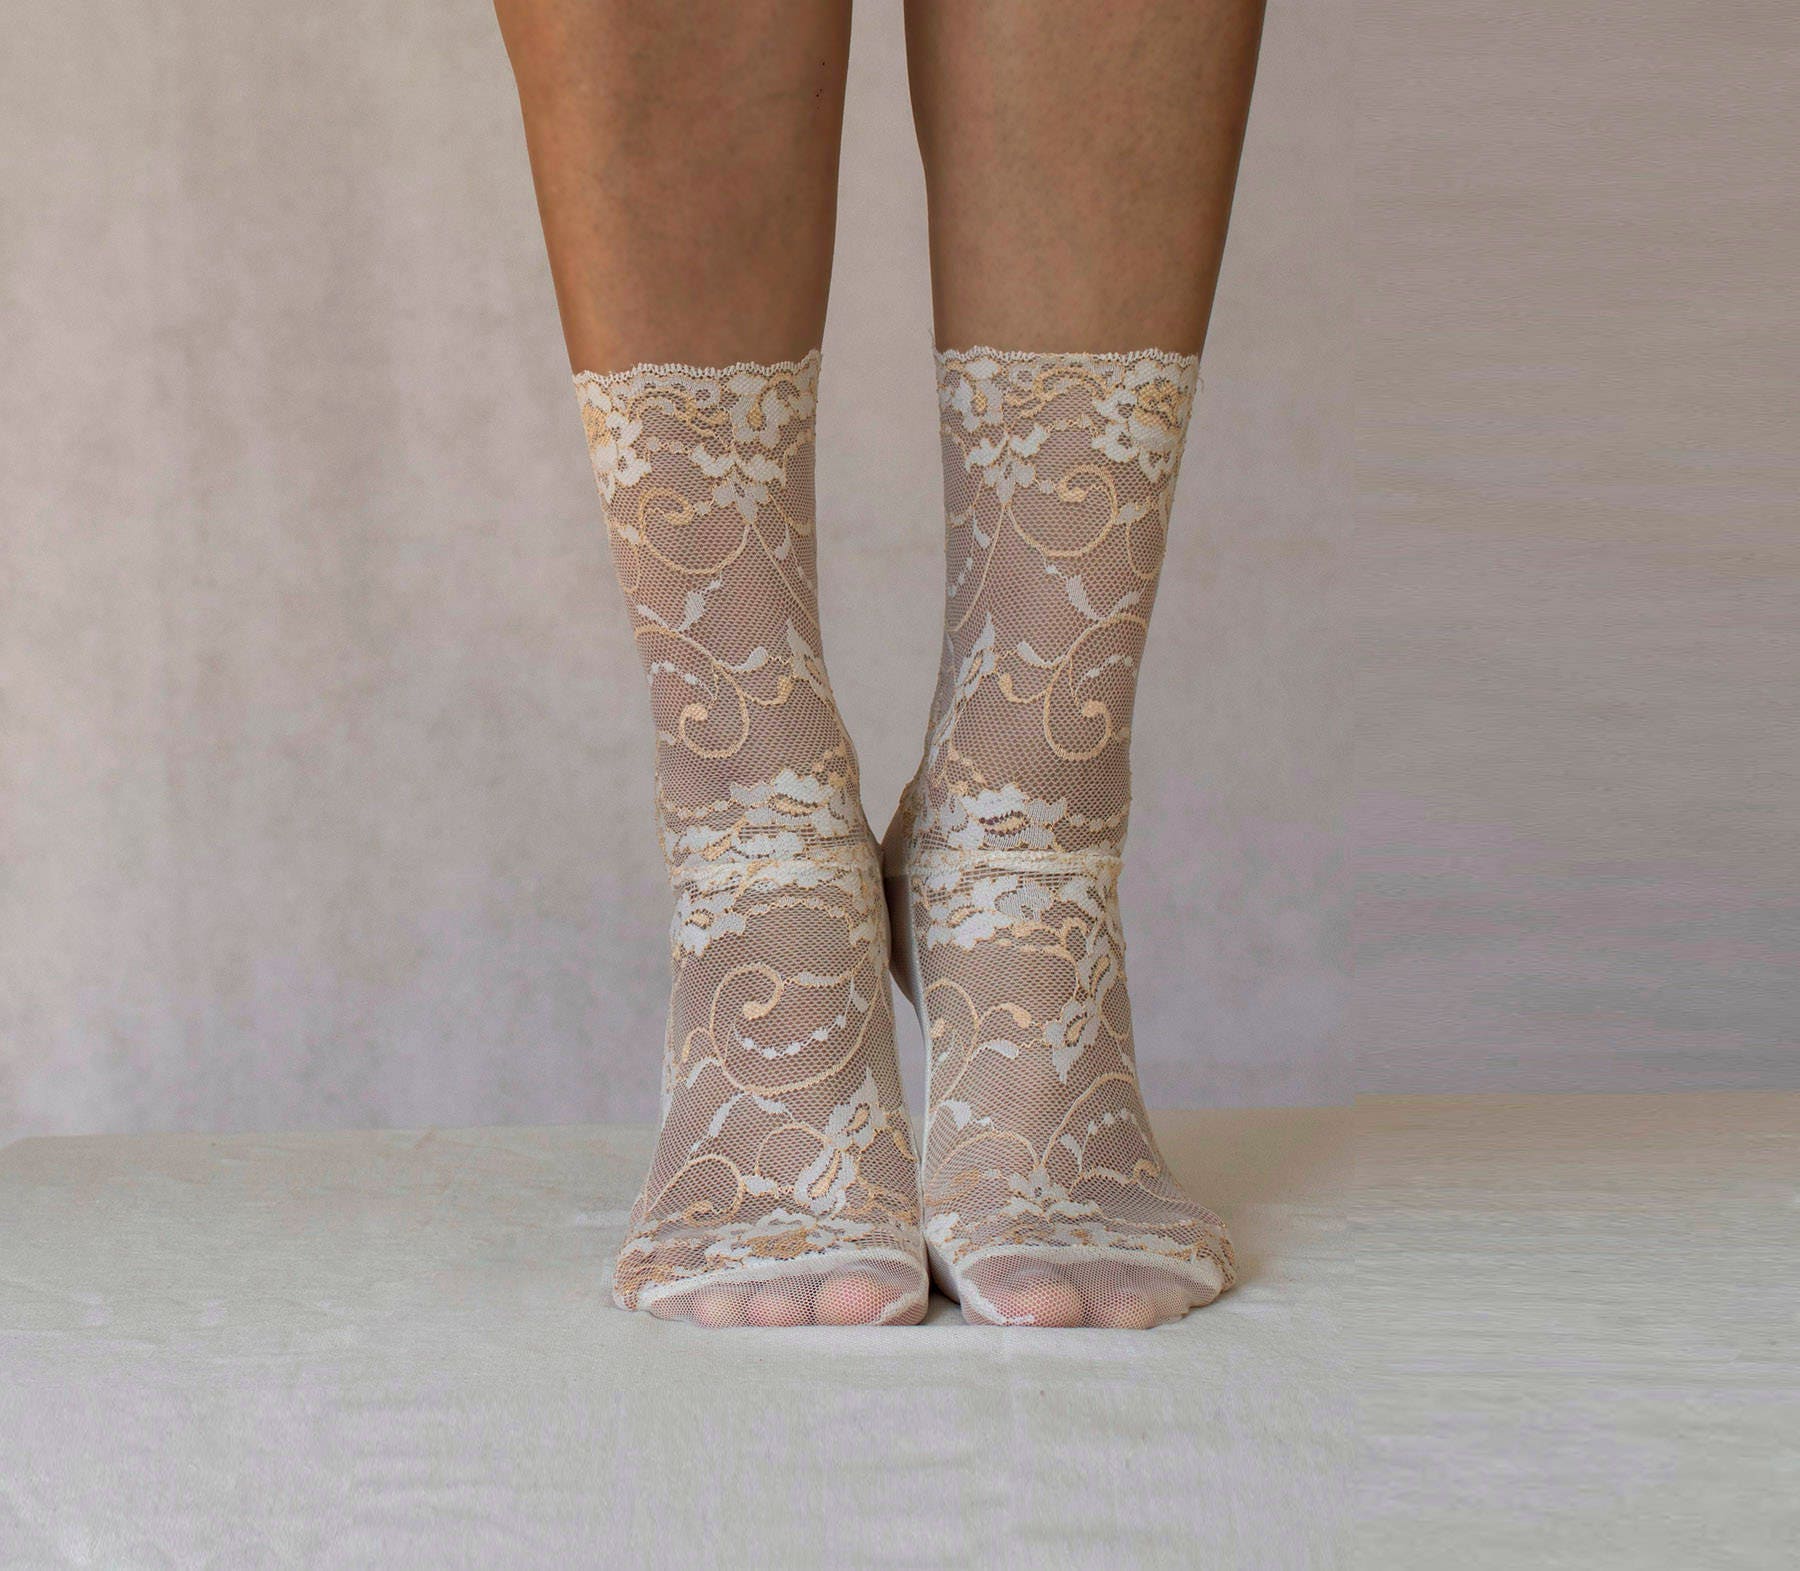 Lace Socks. Ivory and Beige Floral Scalloped Edge Design. | Etsy